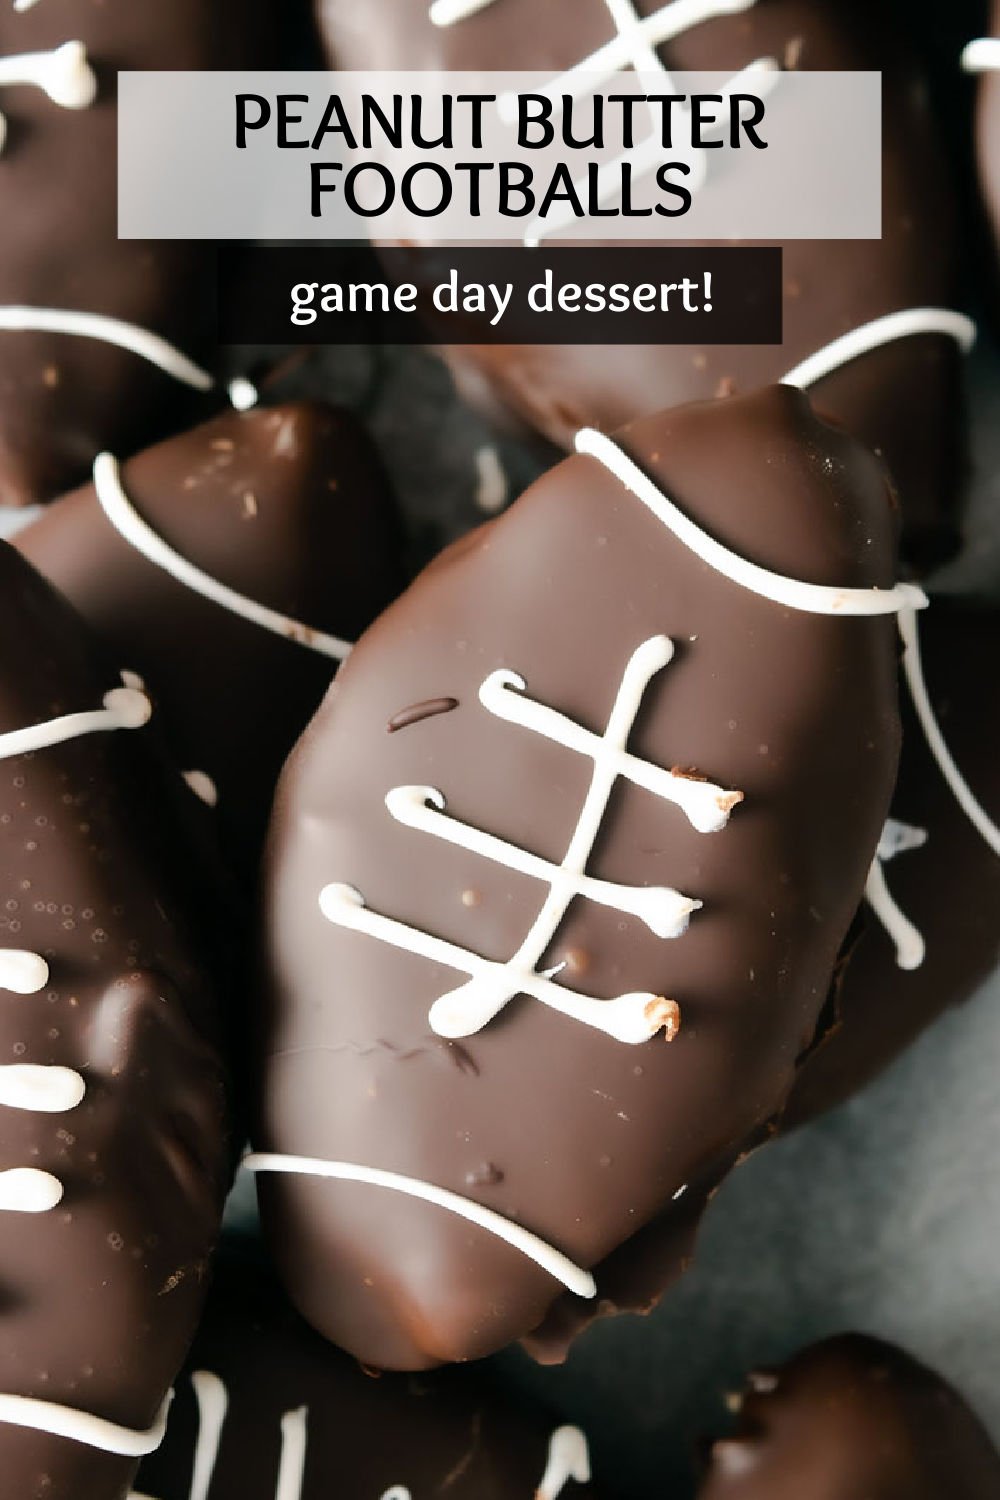 Chocolate Covered Peanut Butter Footballs are a fun game day treat. Creamy peanut butter shaped footballs dipped in dark chocolate and topped with white chocolate "laces", these easy footballs are the perfect tailgate dessert! | www.persnicketyplates.com